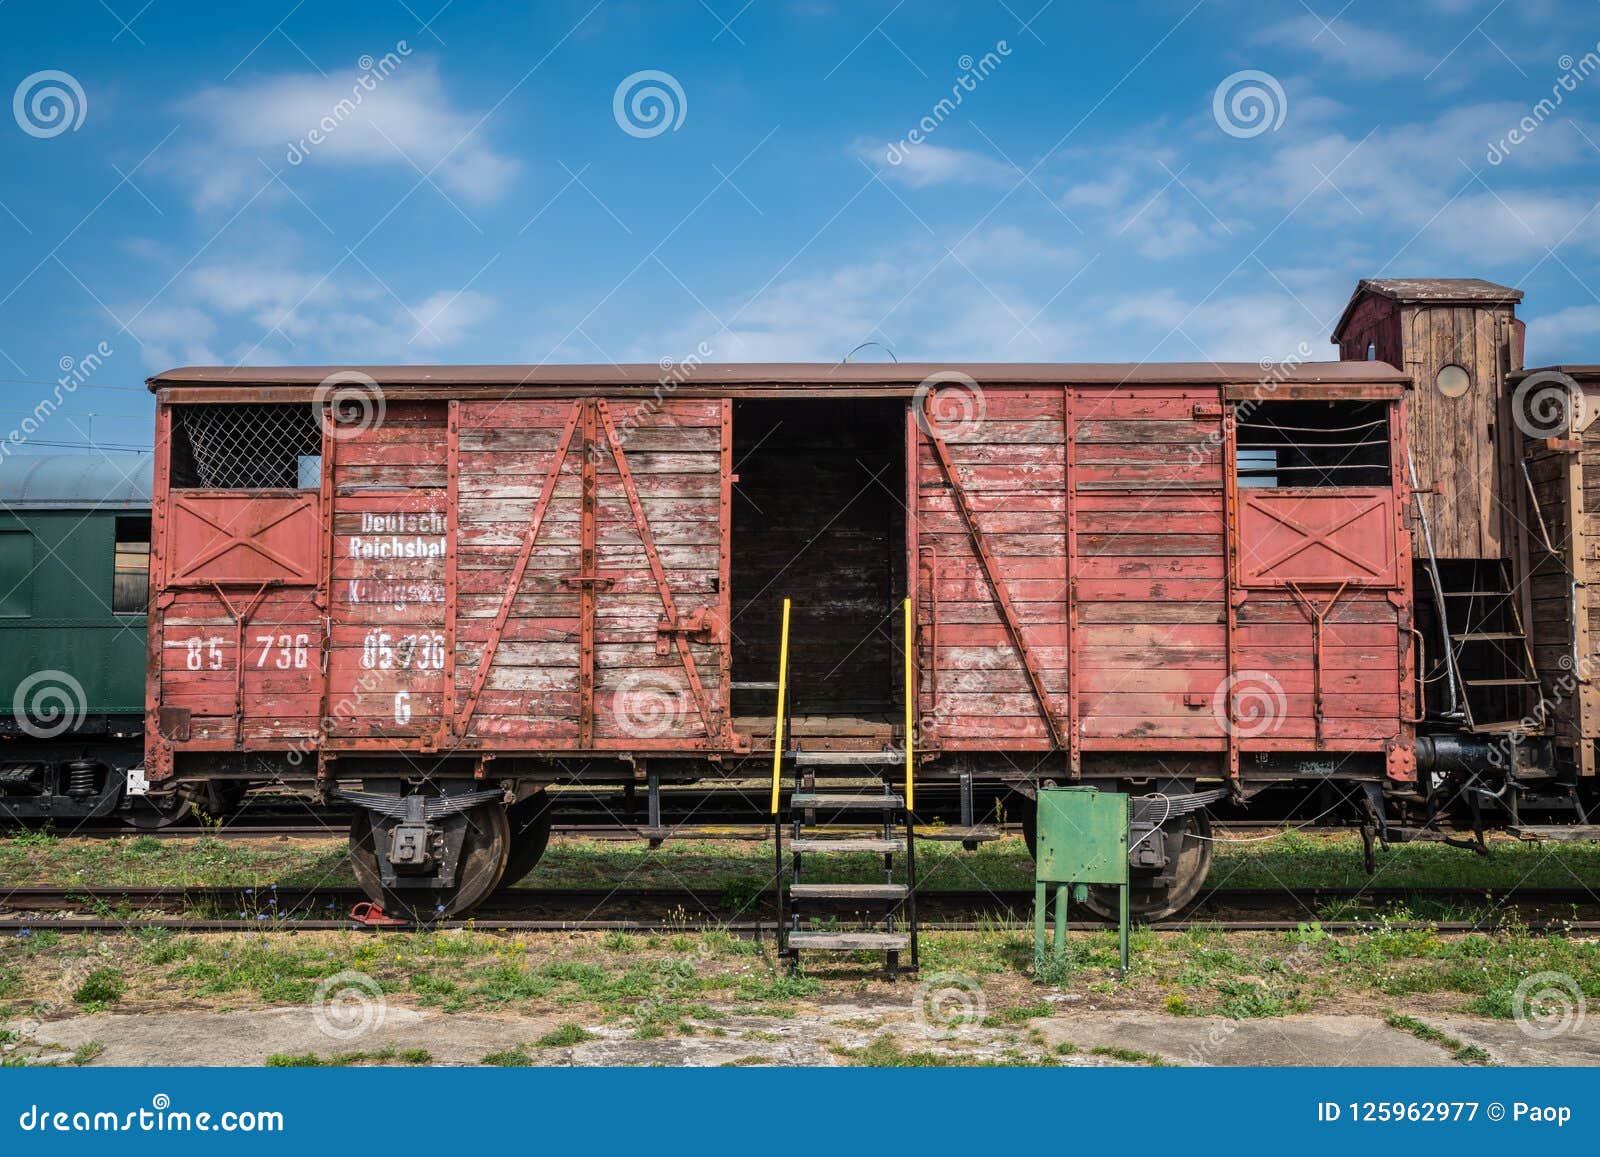 6x8 FT Backdrop Photographers,Rustic Old Train in Country Locomotive Wooden Wagons Rail Road with Smoke Background for Kid Baby Boy Girl Artistic Portrait Photo Shoot Studio Props Video Drape Vinyl